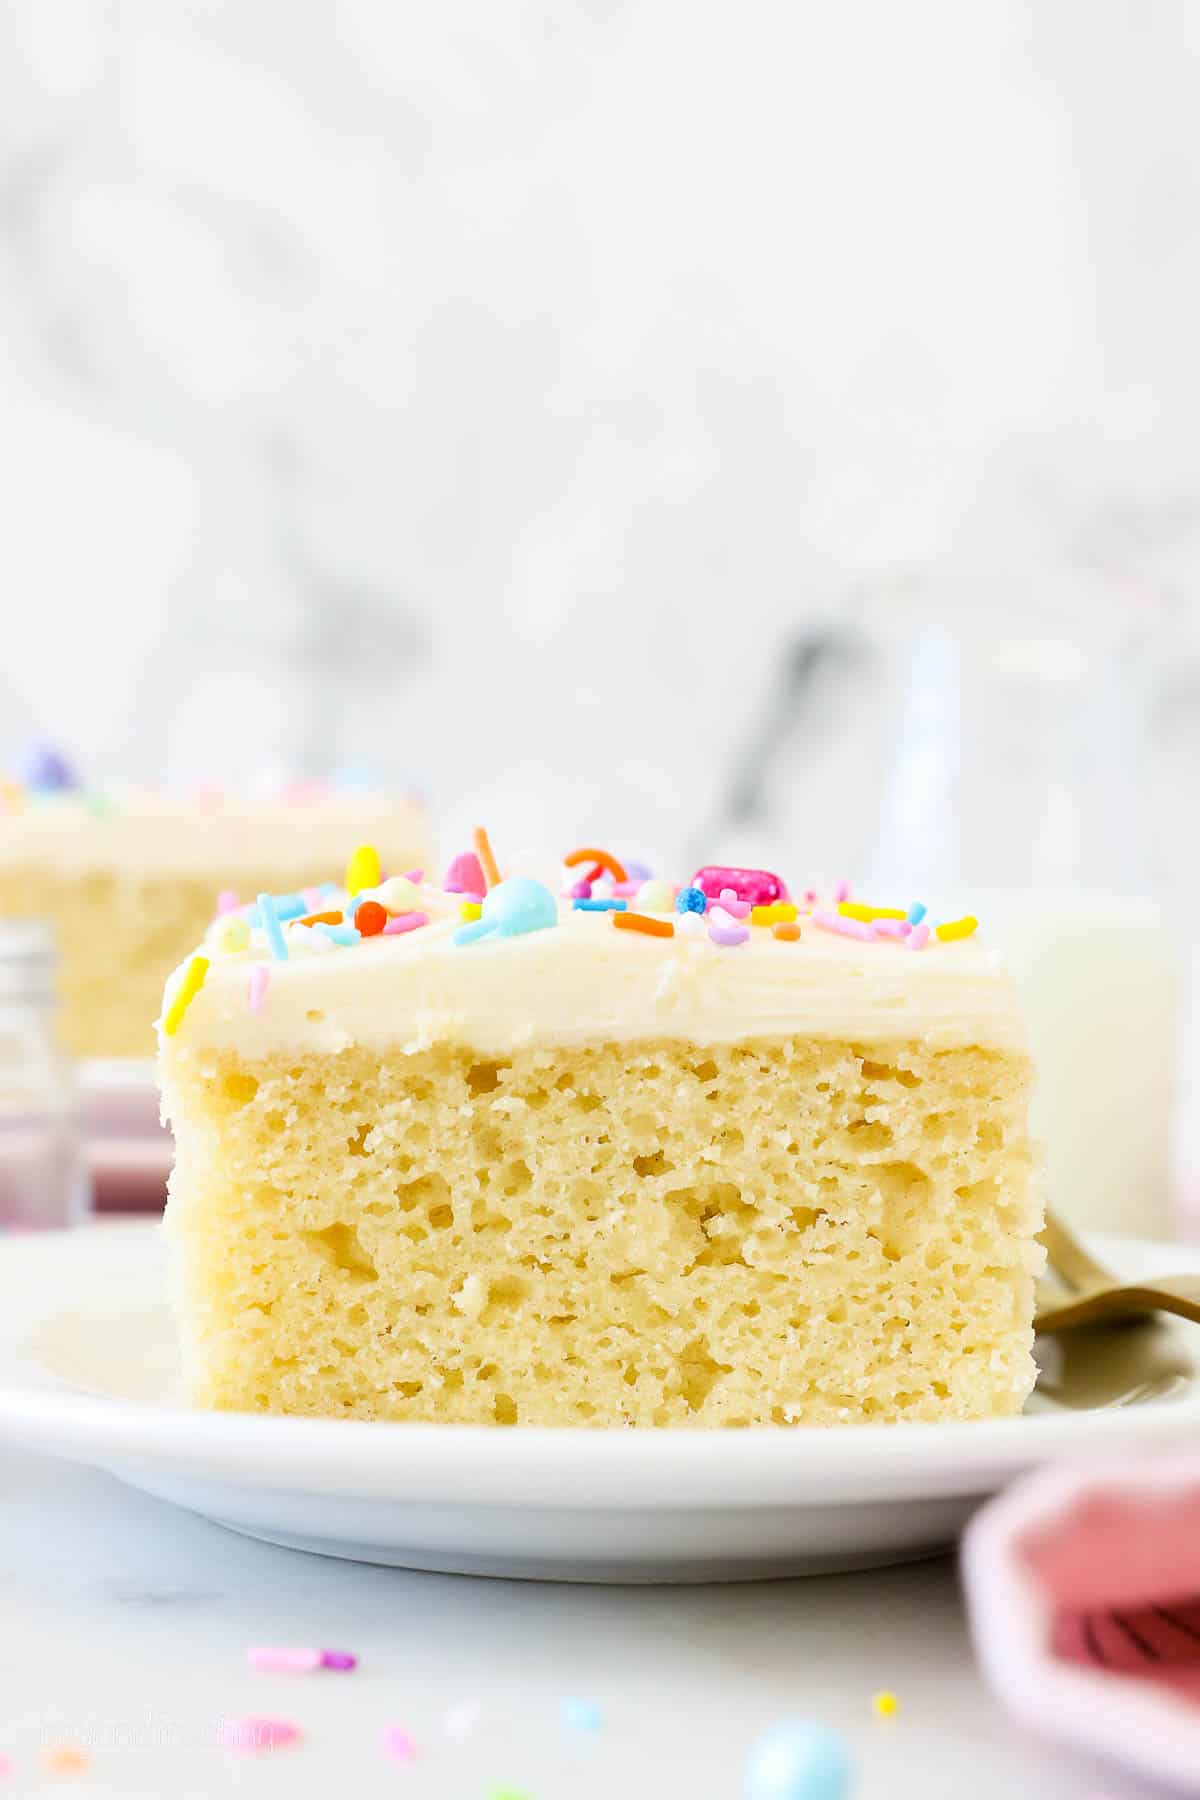 A slice of frosted vanilla cake on a white plate, garnished with rainbow sprinkles.